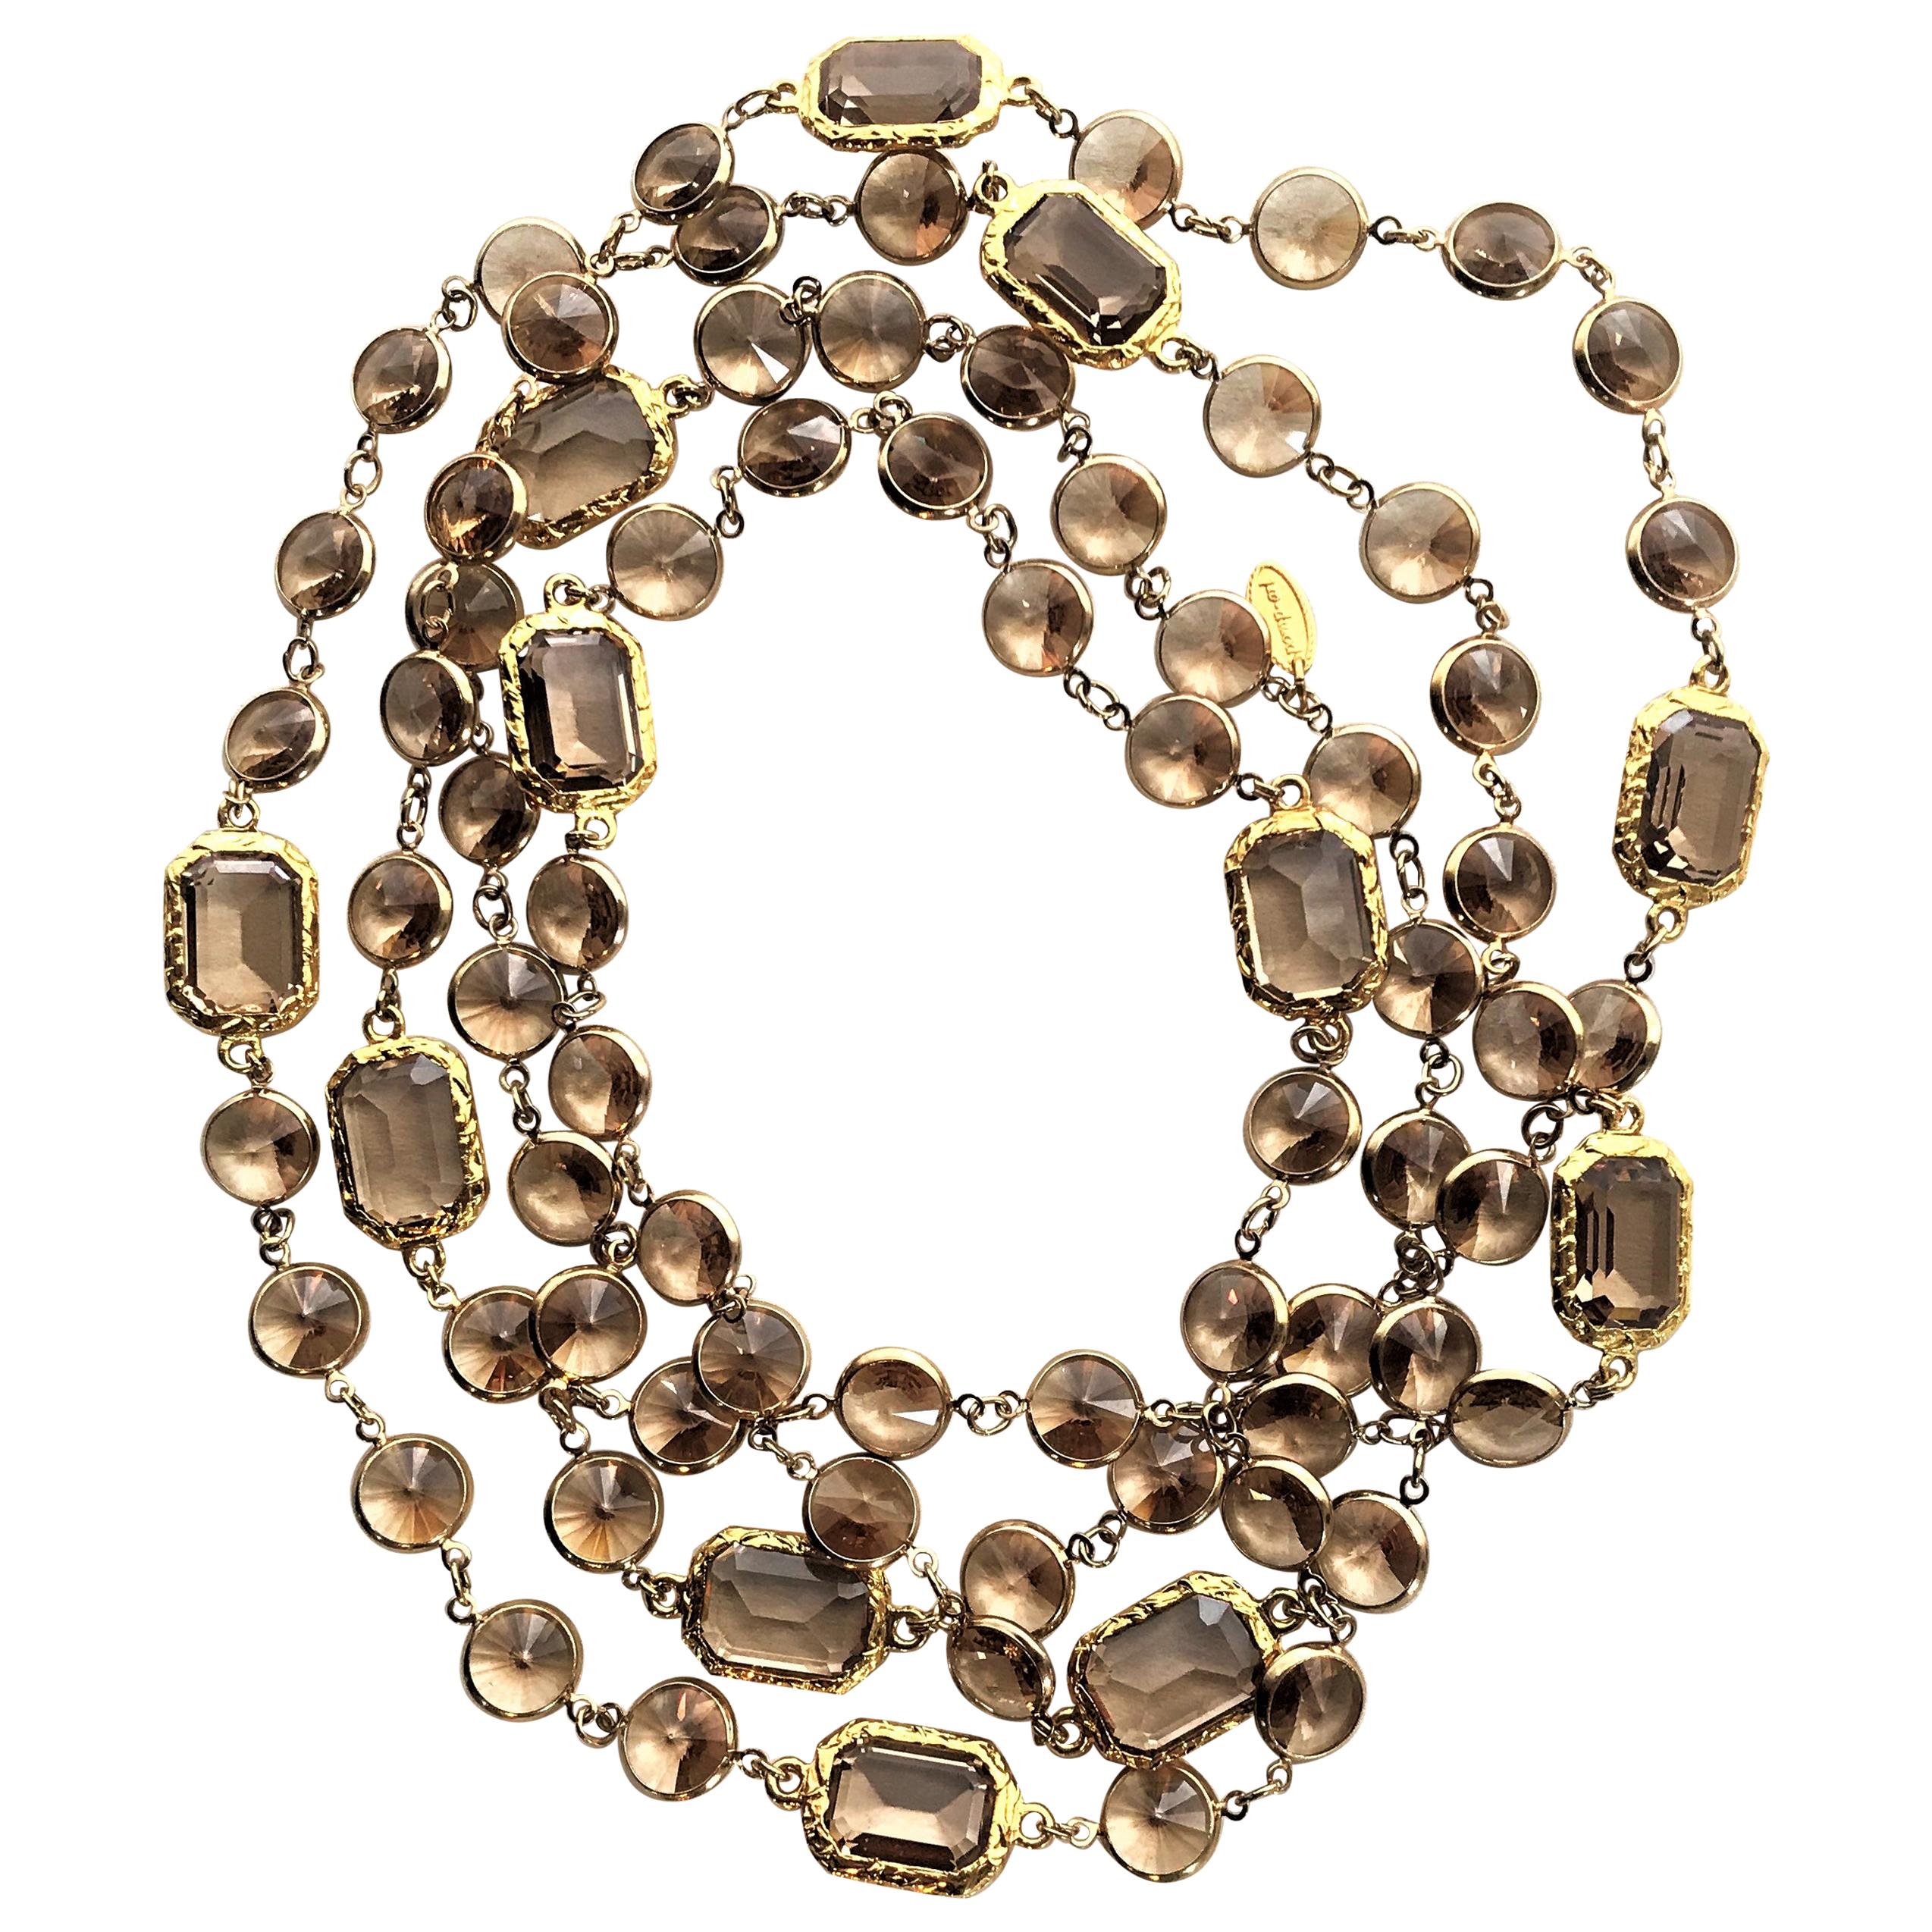 Women's  Necklace like the Chanel Chanel, pink Swarovski crystals gold plated, new  